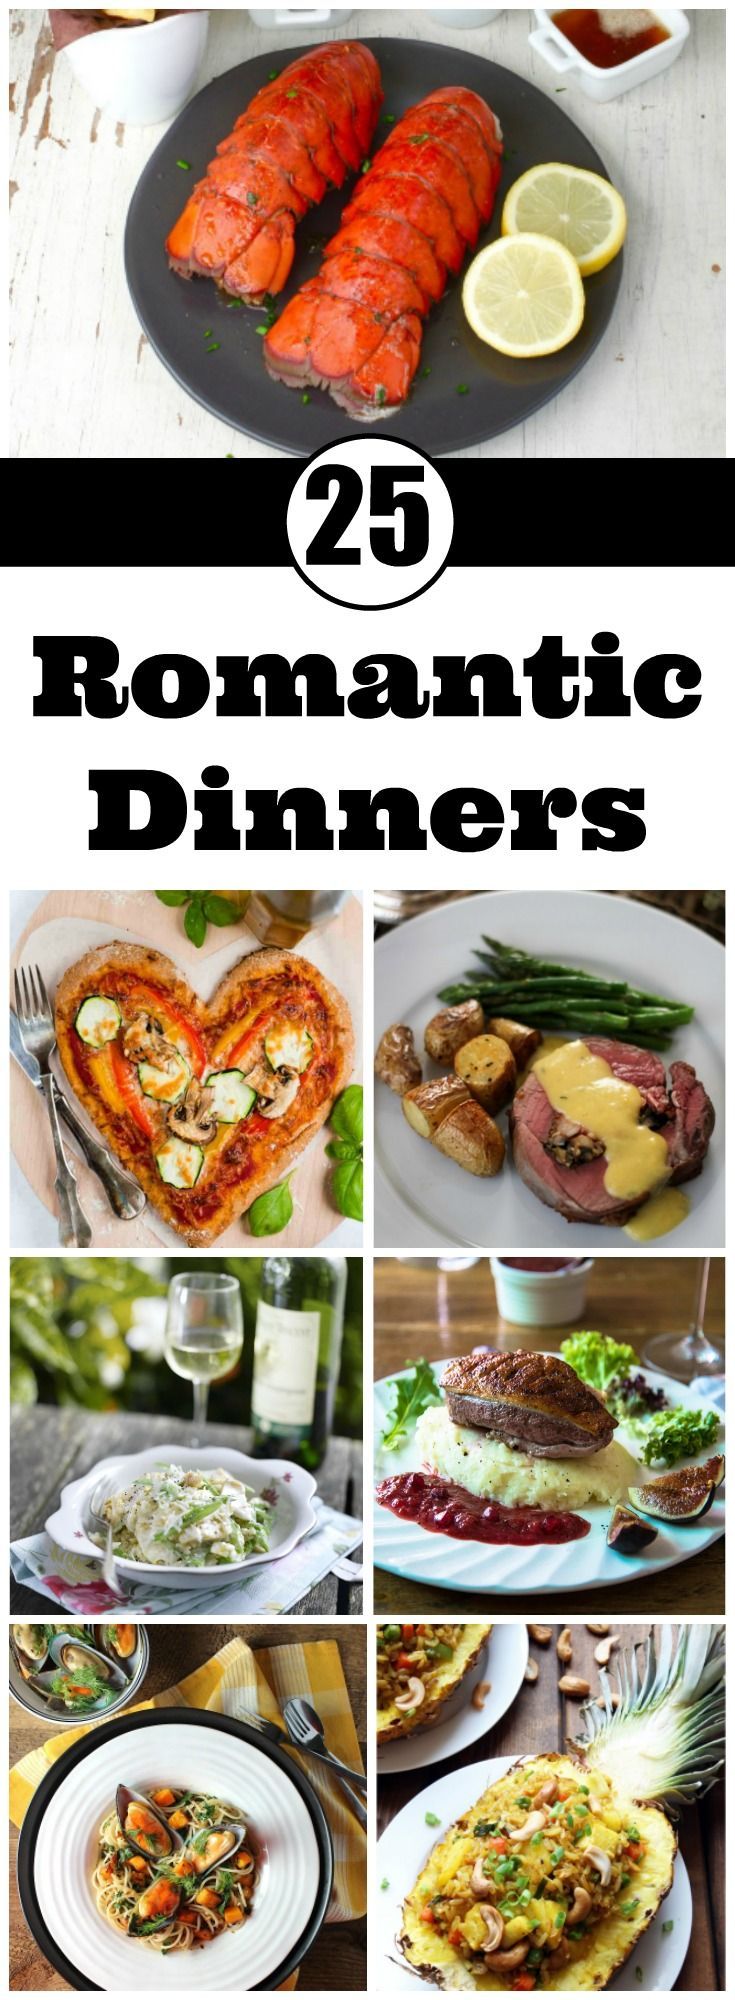 25 Romantic Dinners To Fall In Love All Over Again -   21 romantic dinner recipes
 ideas